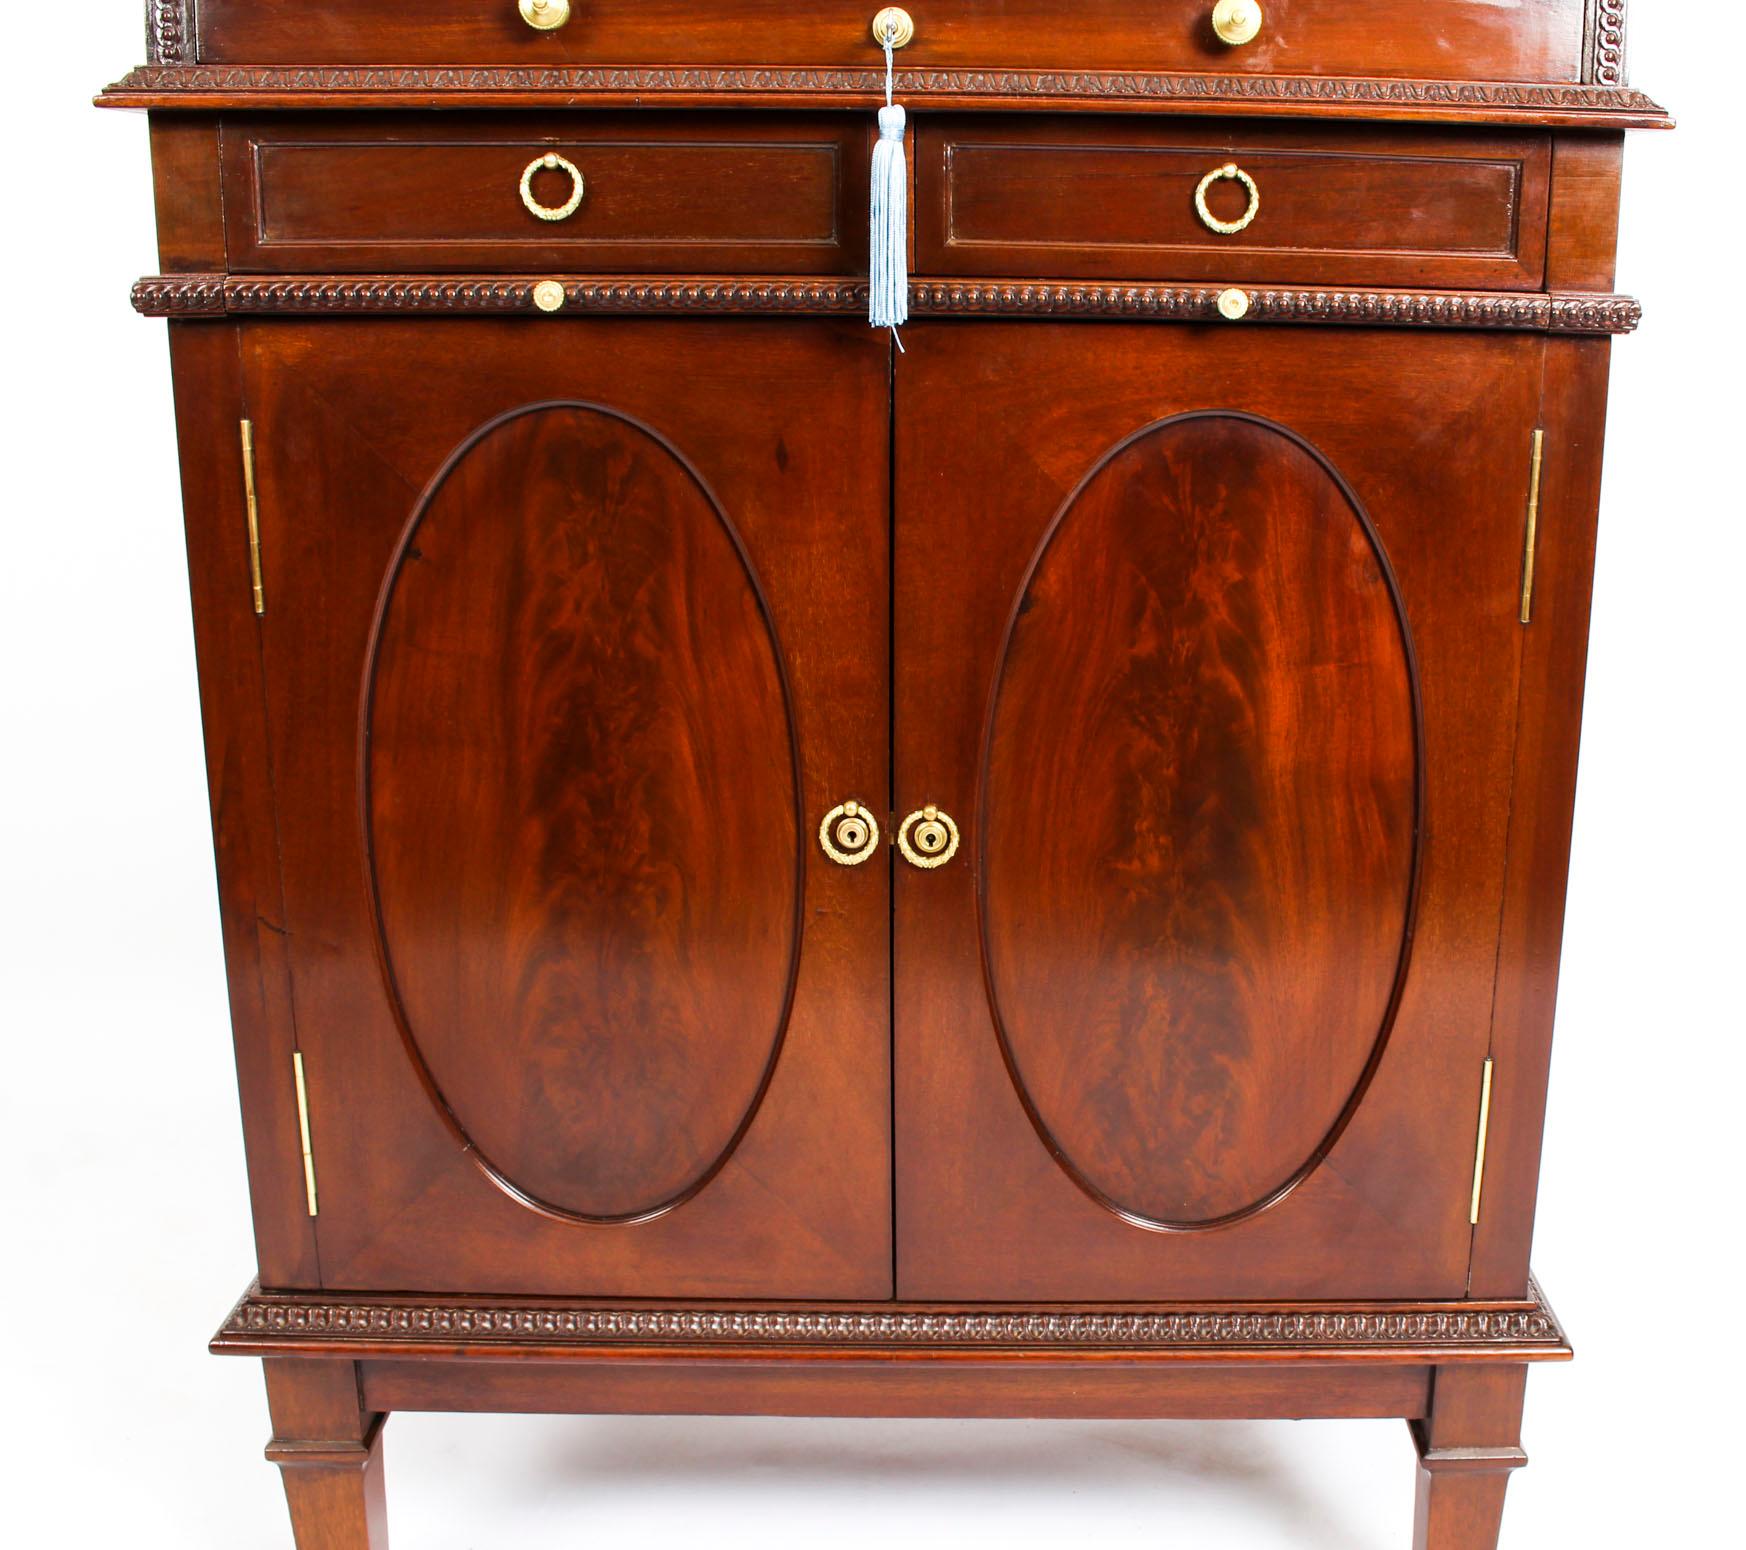 Onyx Antique Mahogany Drinks Cocktail Cabinet Dry Bar, 19th Century